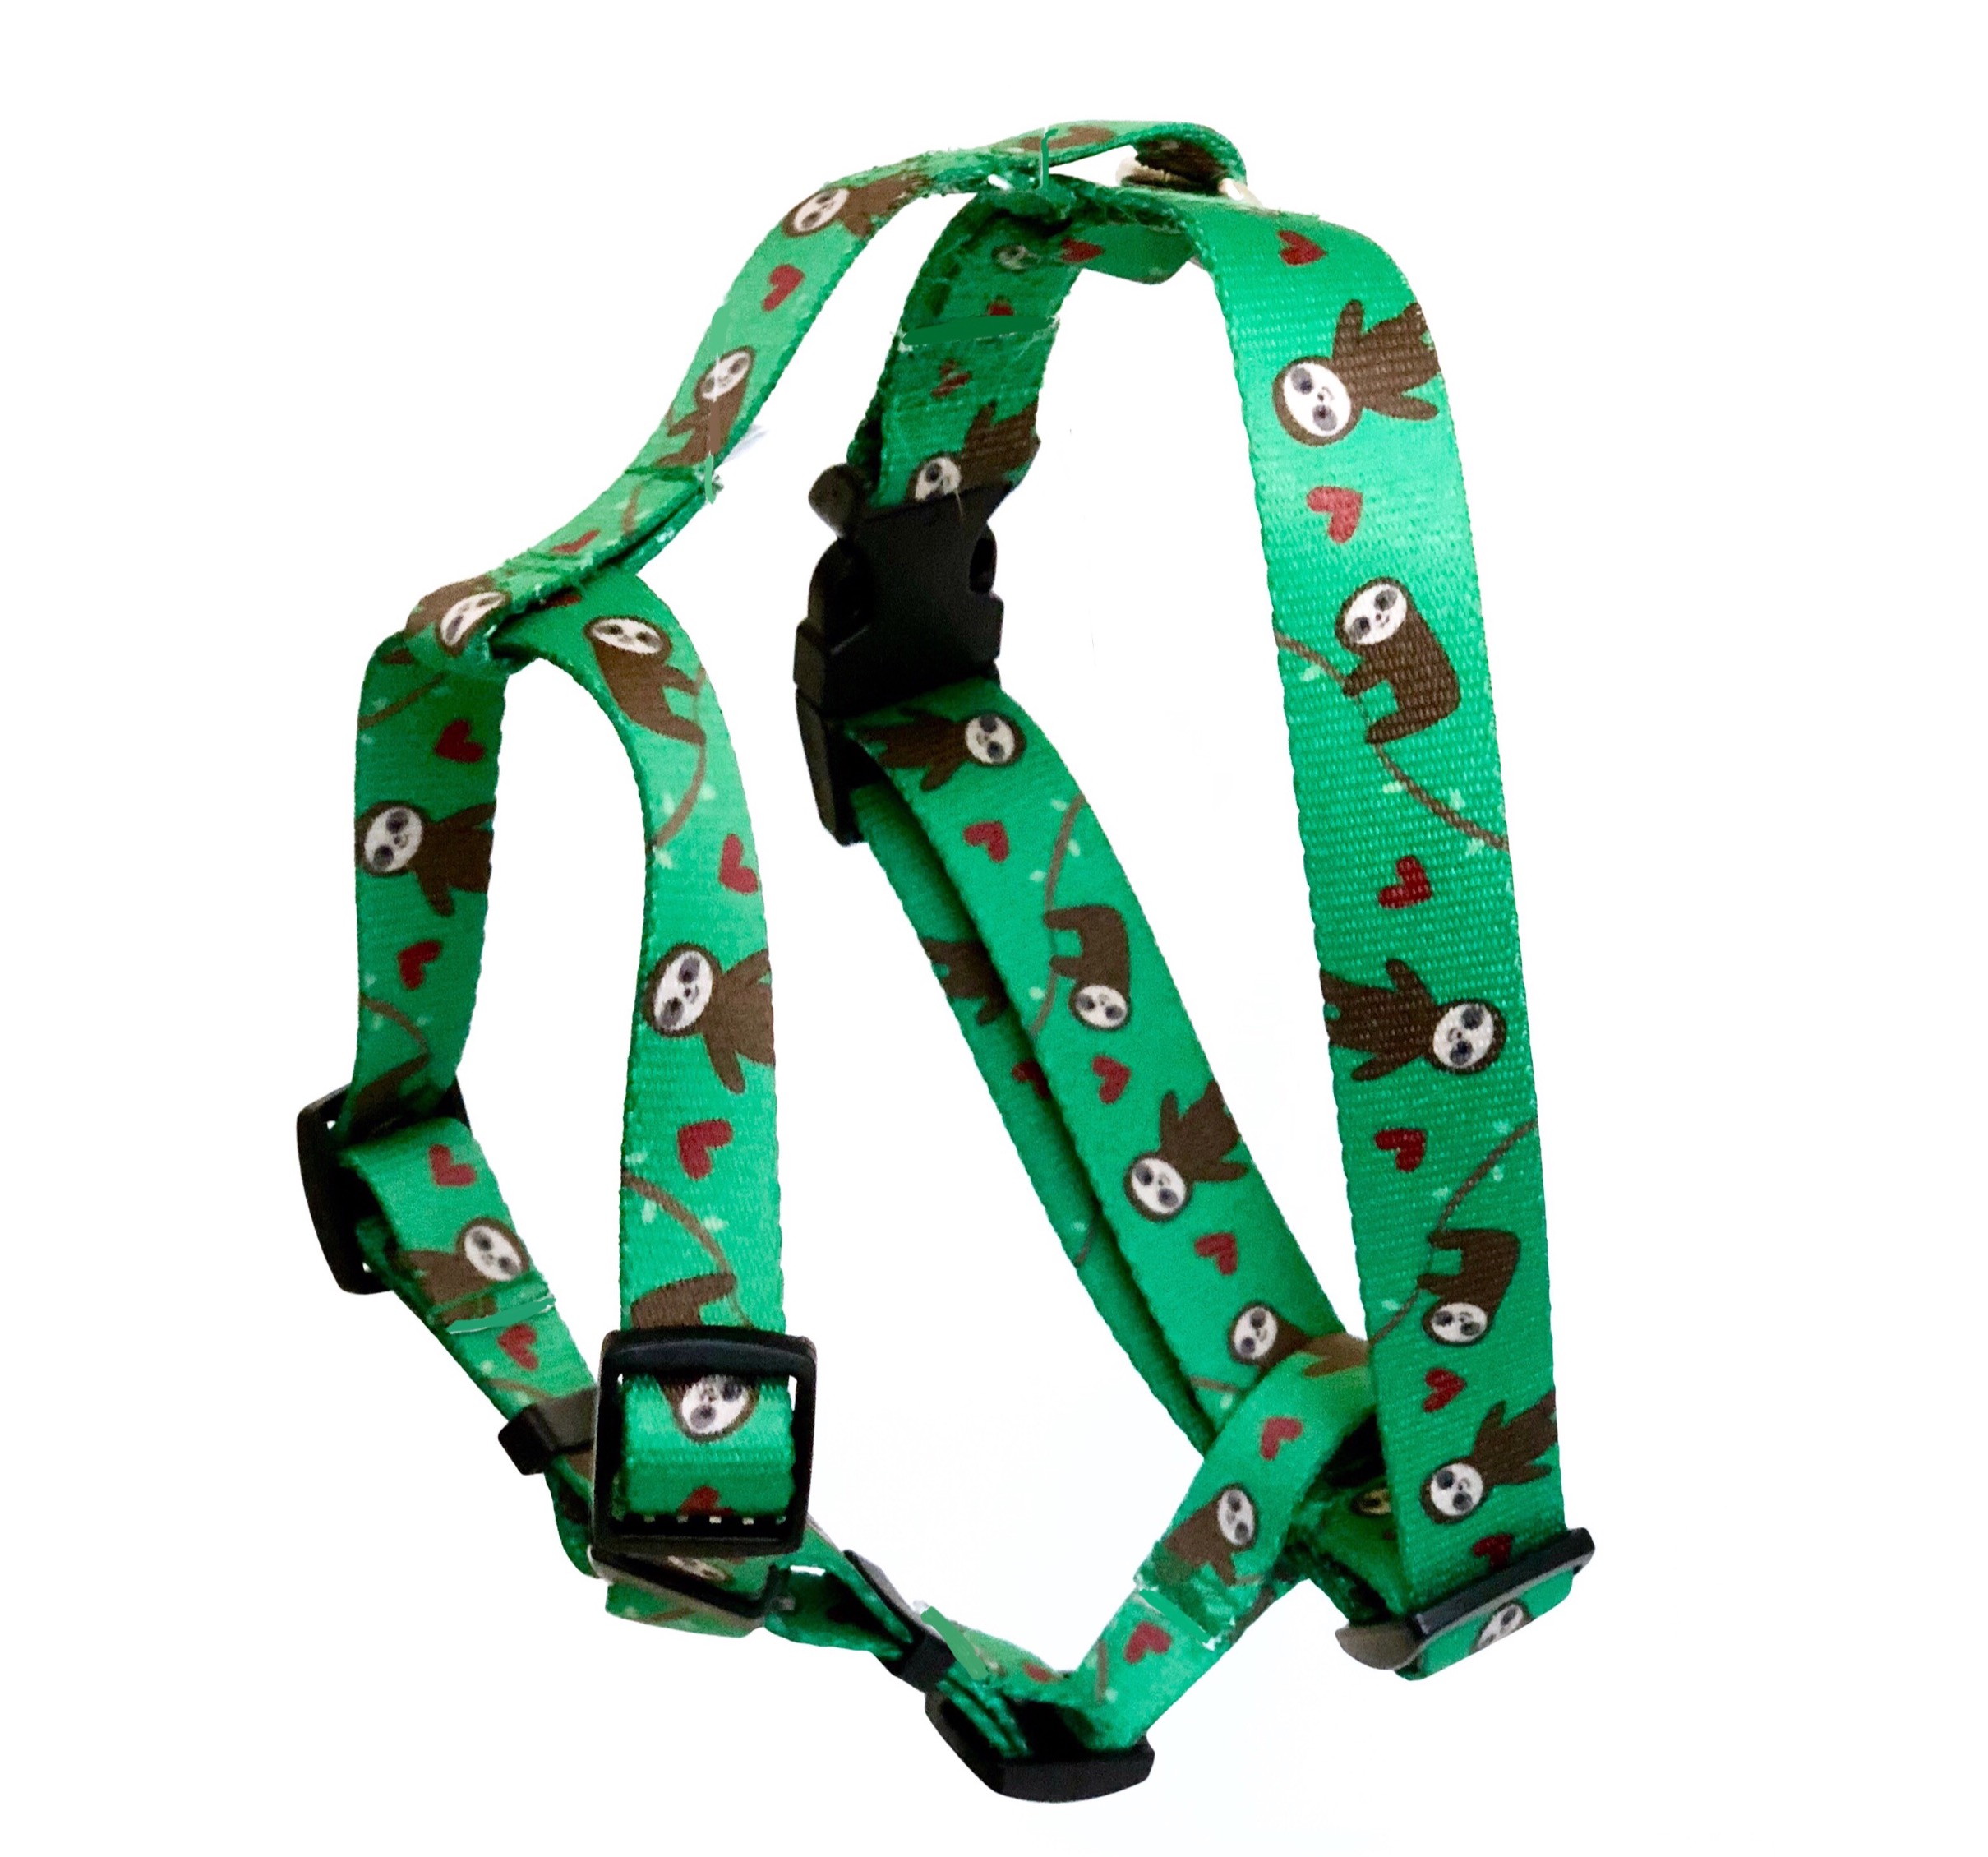 photo of a dog harness and leash set in beach print by FearLess Pet